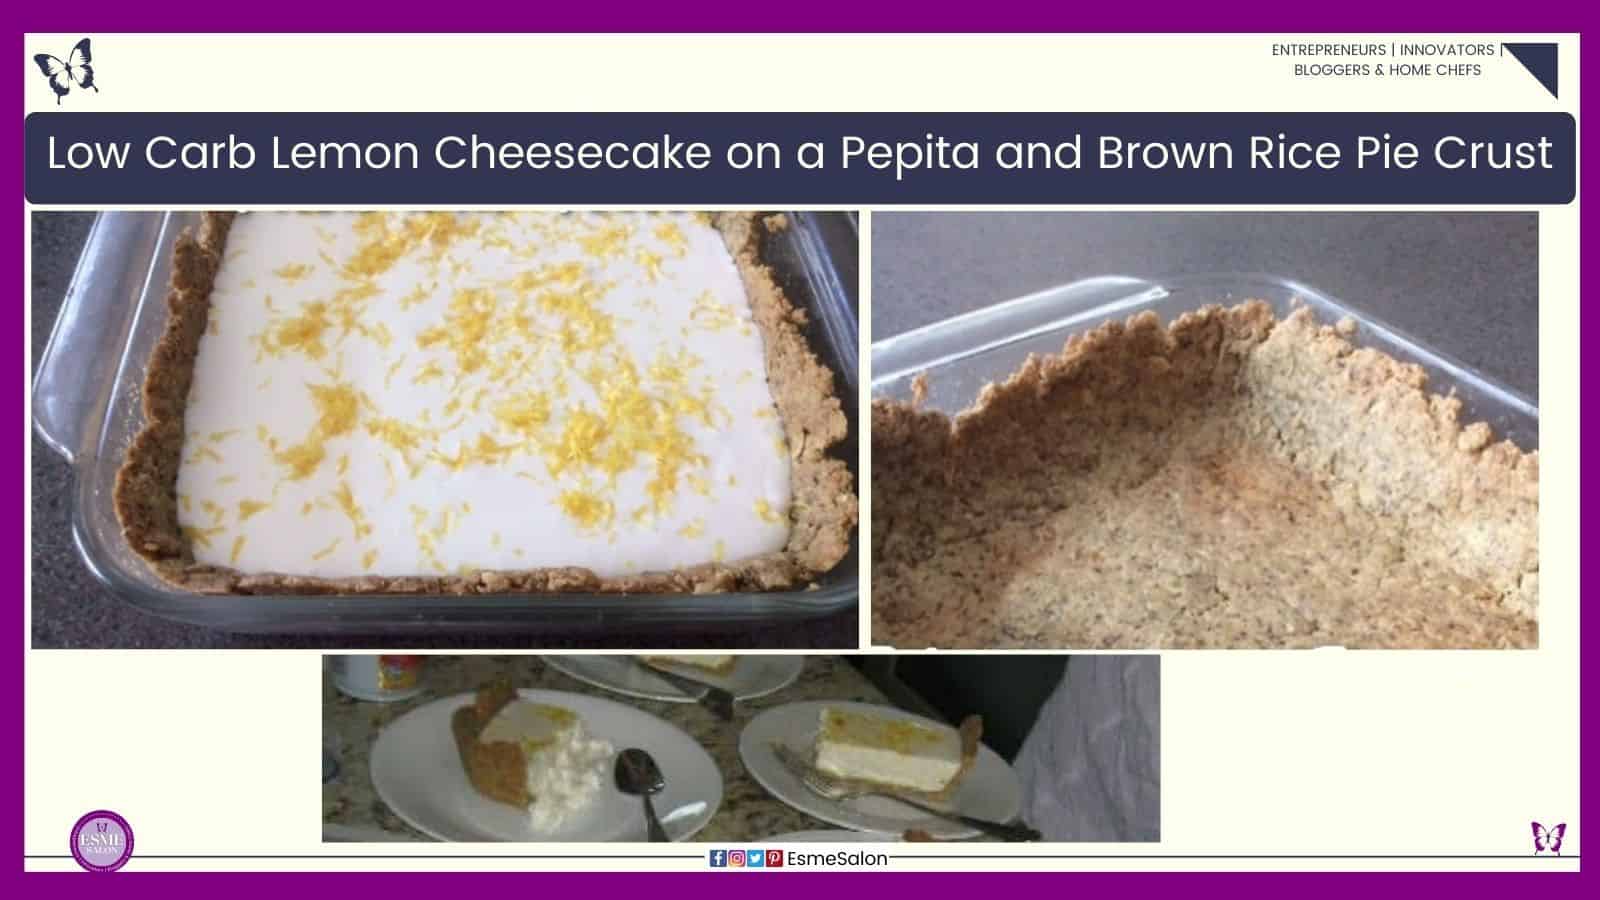 an image of side plates with a slice each of Low Carb Lemon Cheesecake and the dish with the Pepita and Brown Rice Pie Crust